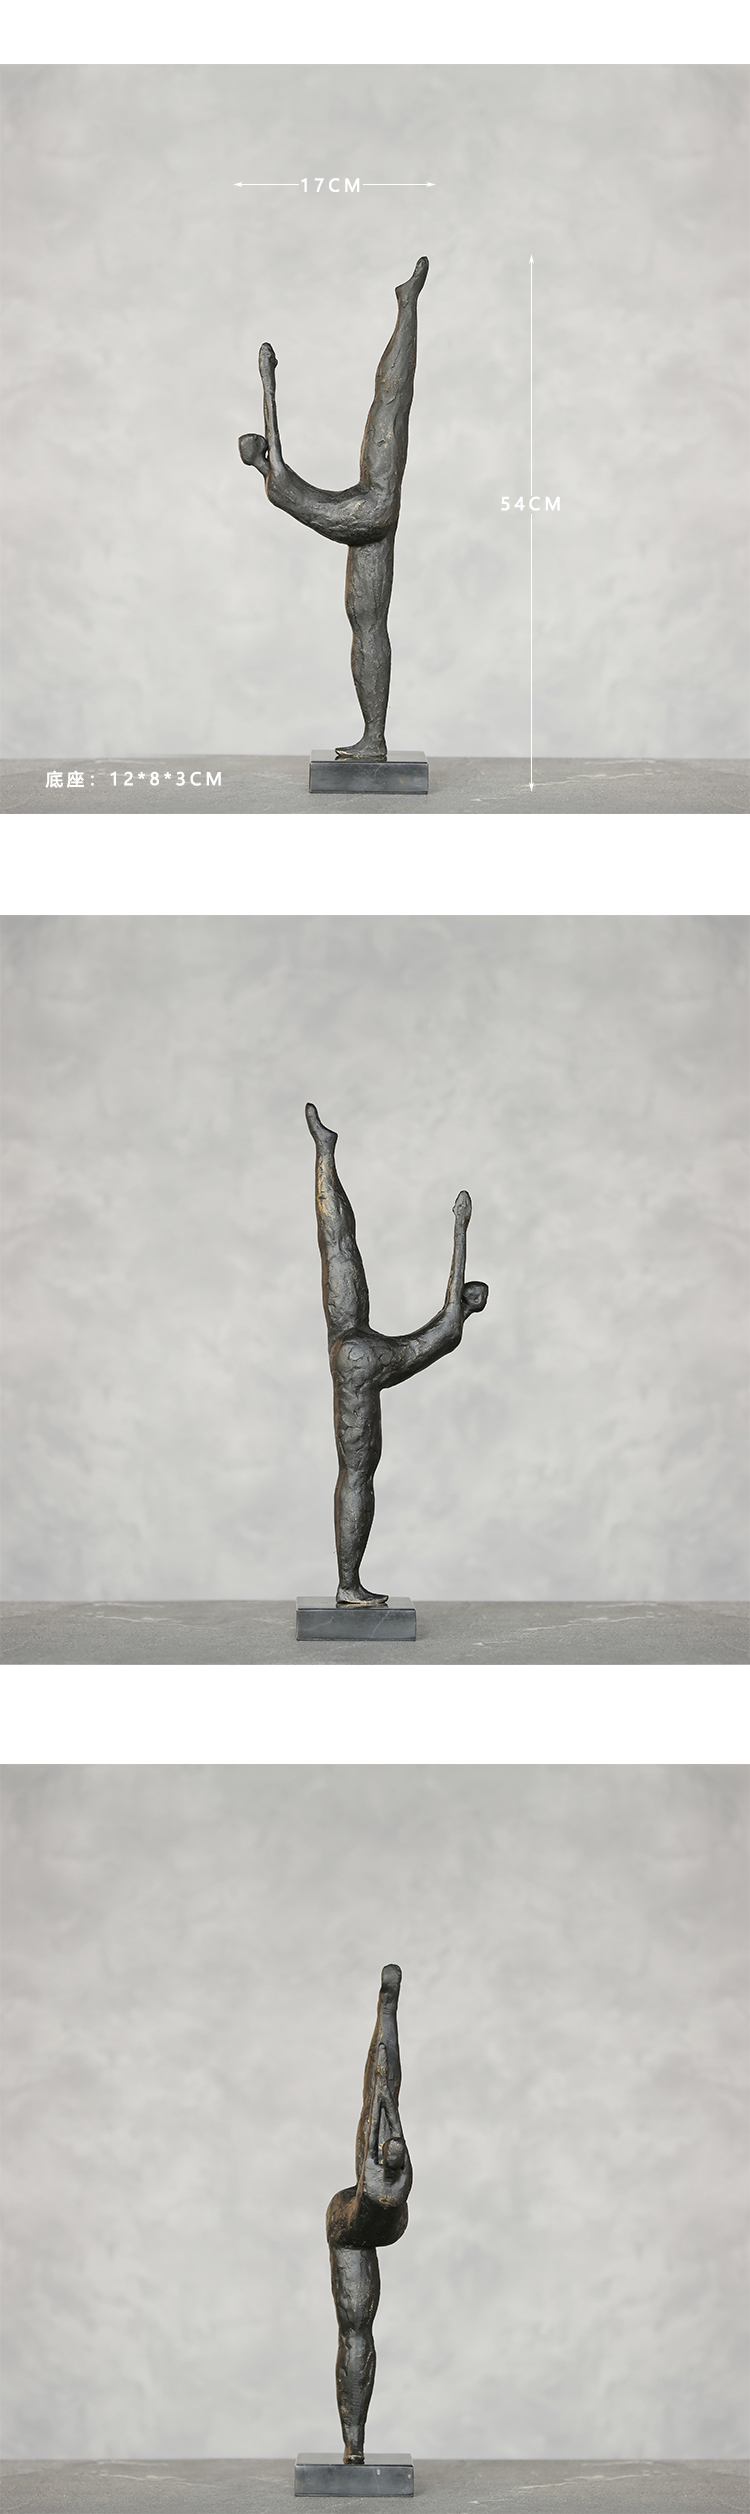 Home Decor Accessories Art Abstract Metal Figure Stand On Marble With Folded Hands Do Yoga Statue Decor Figurine Room Ornament